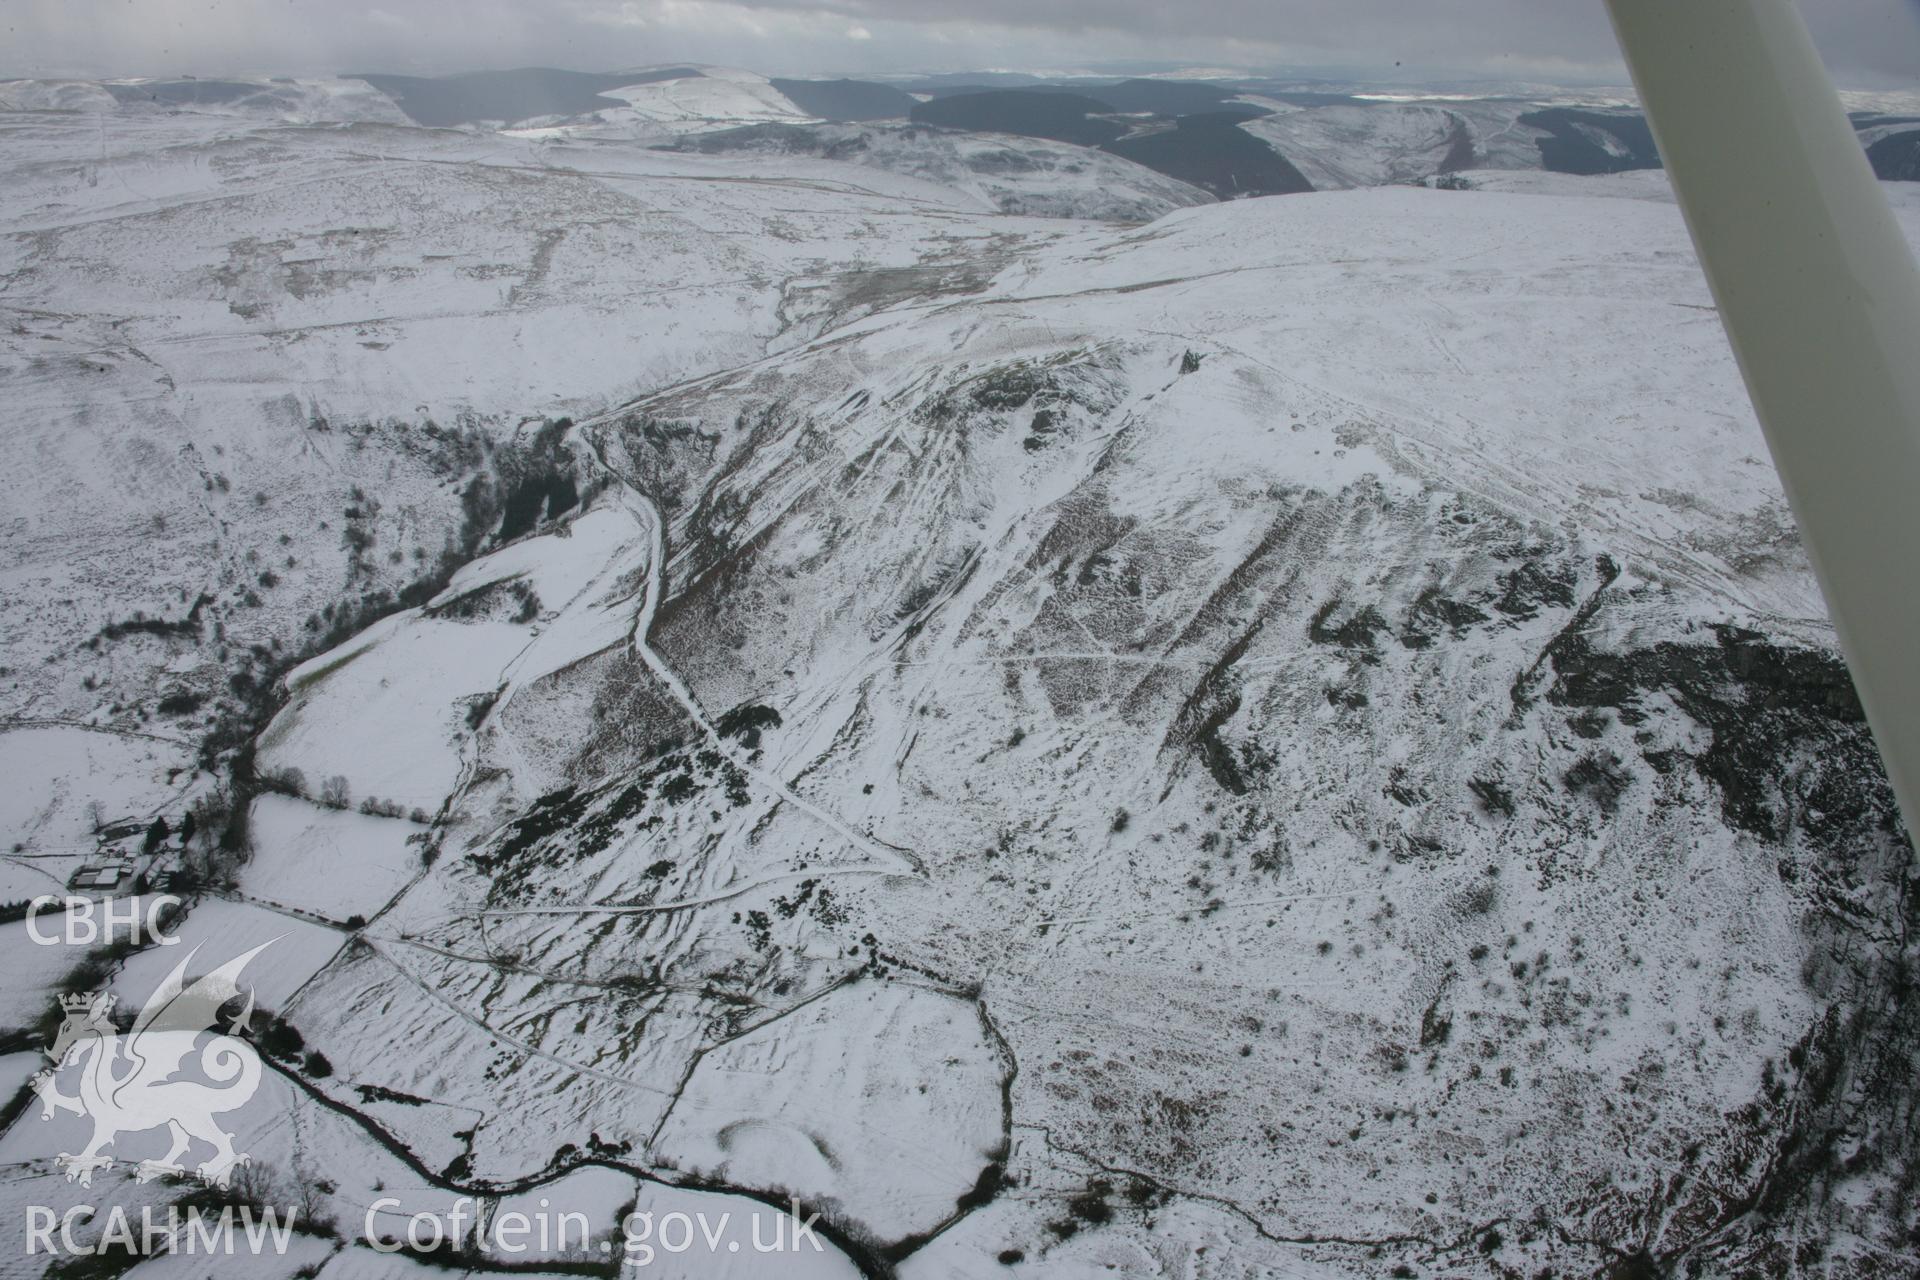 RCAHMW colour oblique aerial photograph of Craig-y-Mwyn Lead Mine, Llanrhaeadr-Ym-Mochnant, from the north under snow. Taken on 06 March 2006 by Toby Driver.